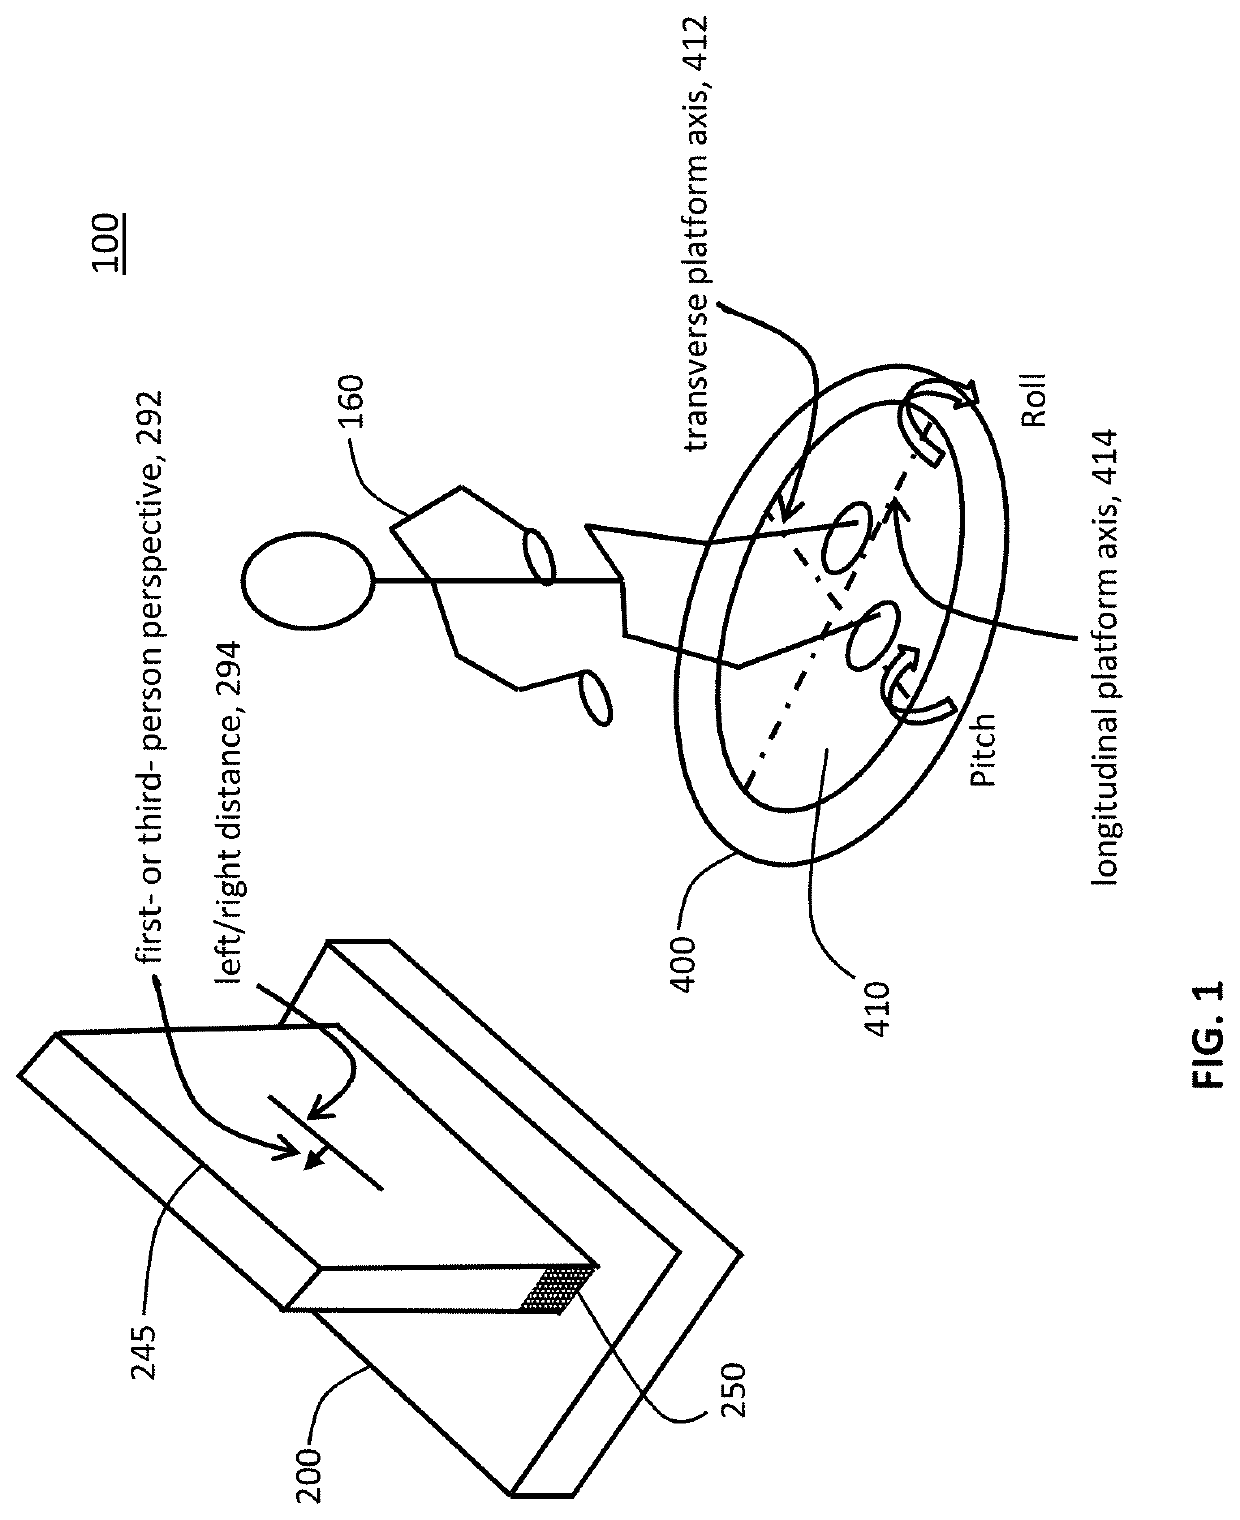 Game system with game machine executing a game program that receives inputs and outputs control signals to a game controller